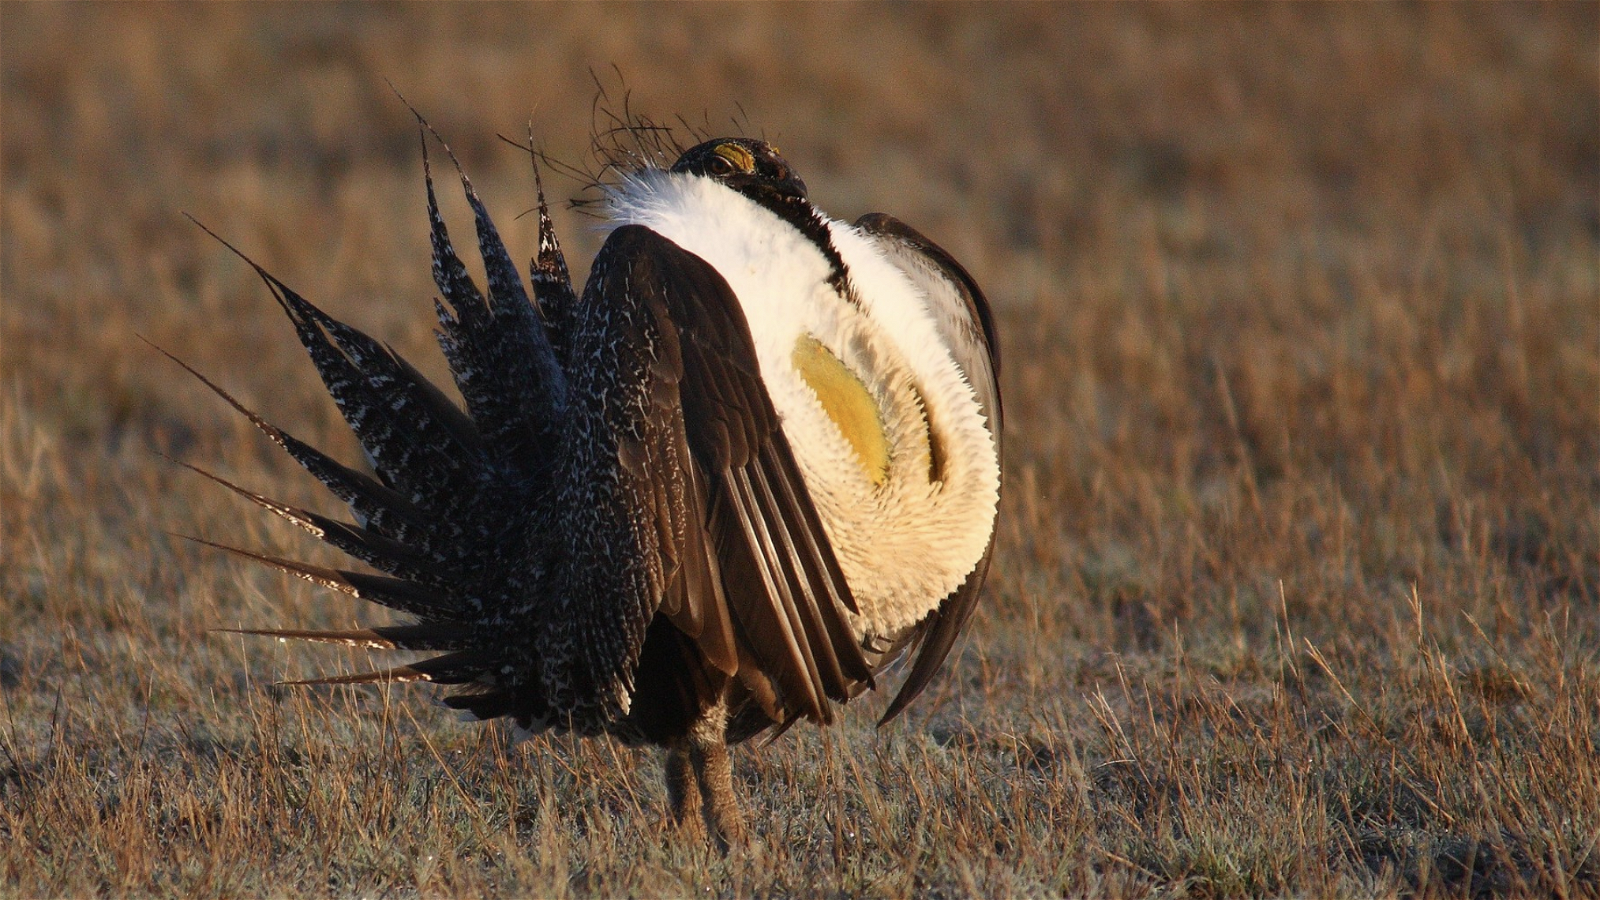 Three ways US Congress could act to protect imperiled wildlife